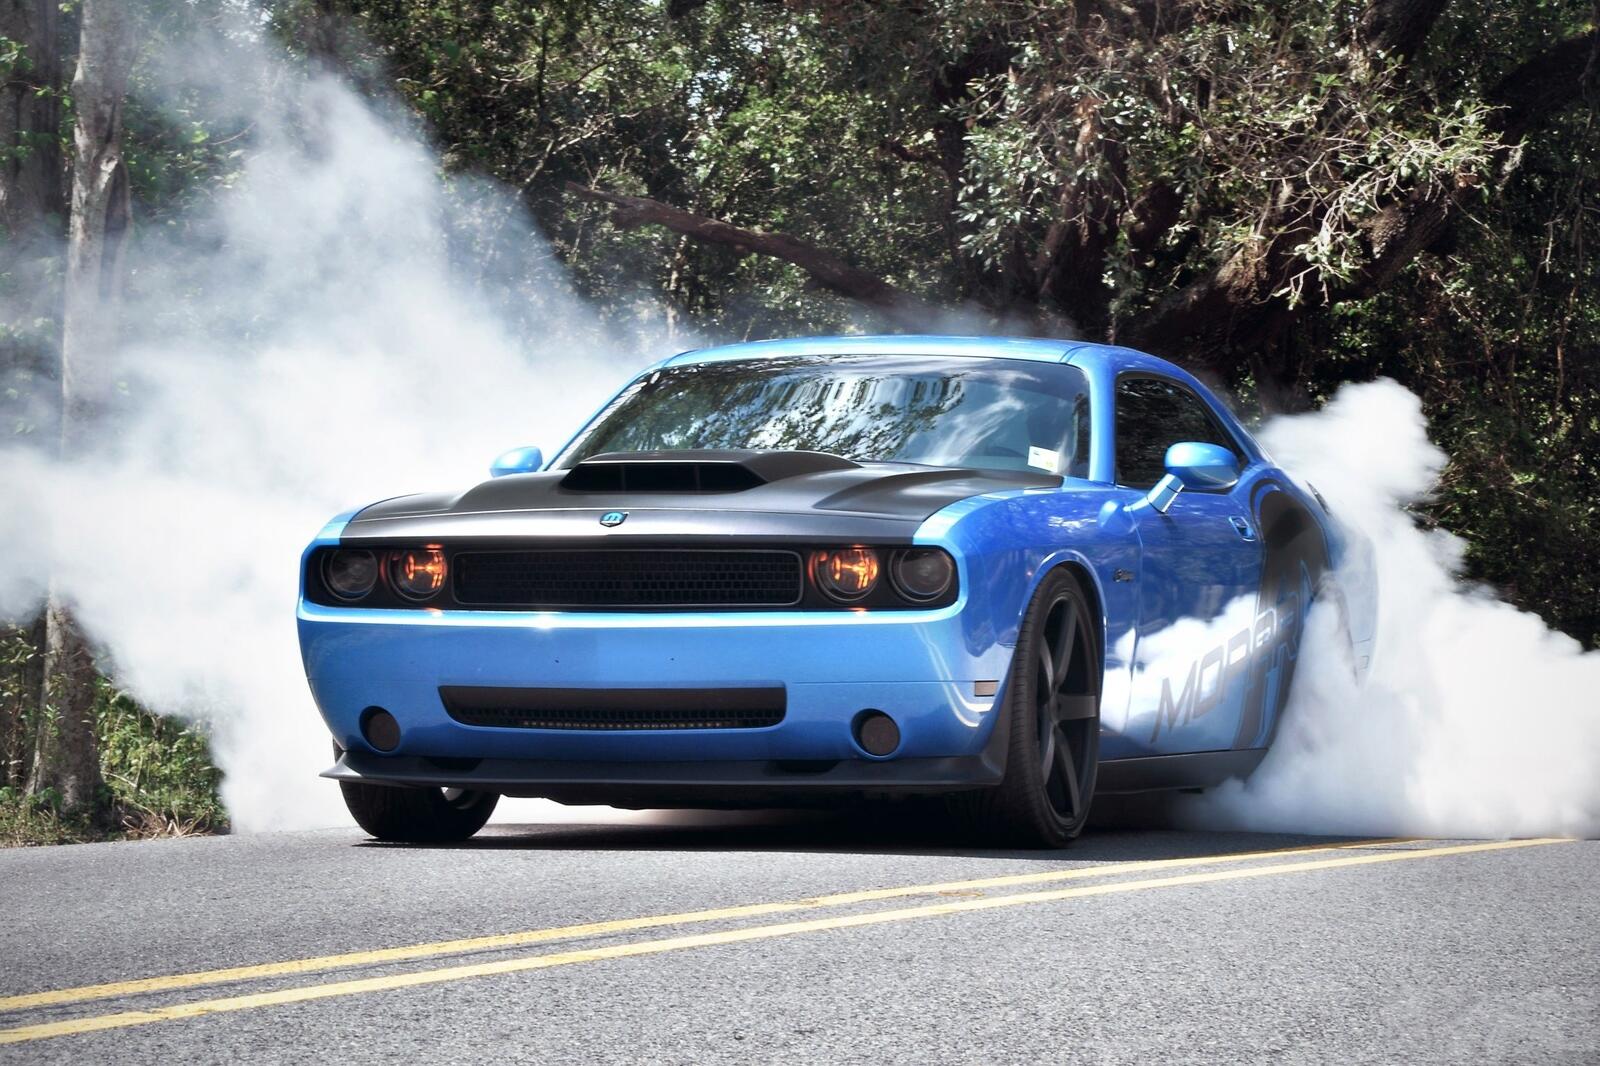 Wallpapers Dodge Challenger view from front blue on the desktop